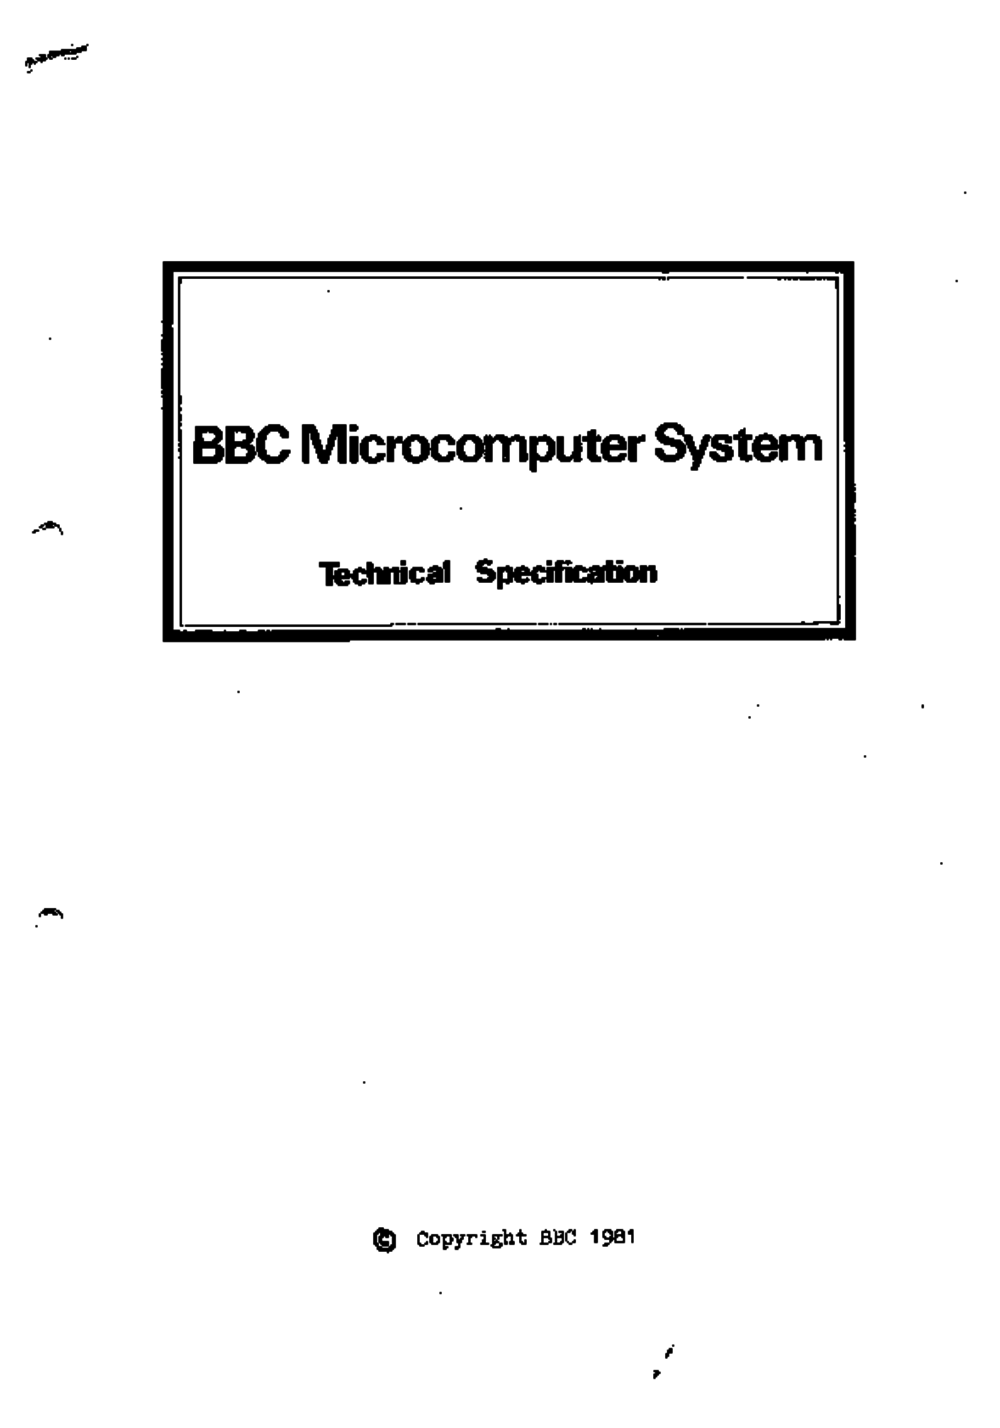 Article: BBC Microcomputer System - Technical Specification - Issue 2